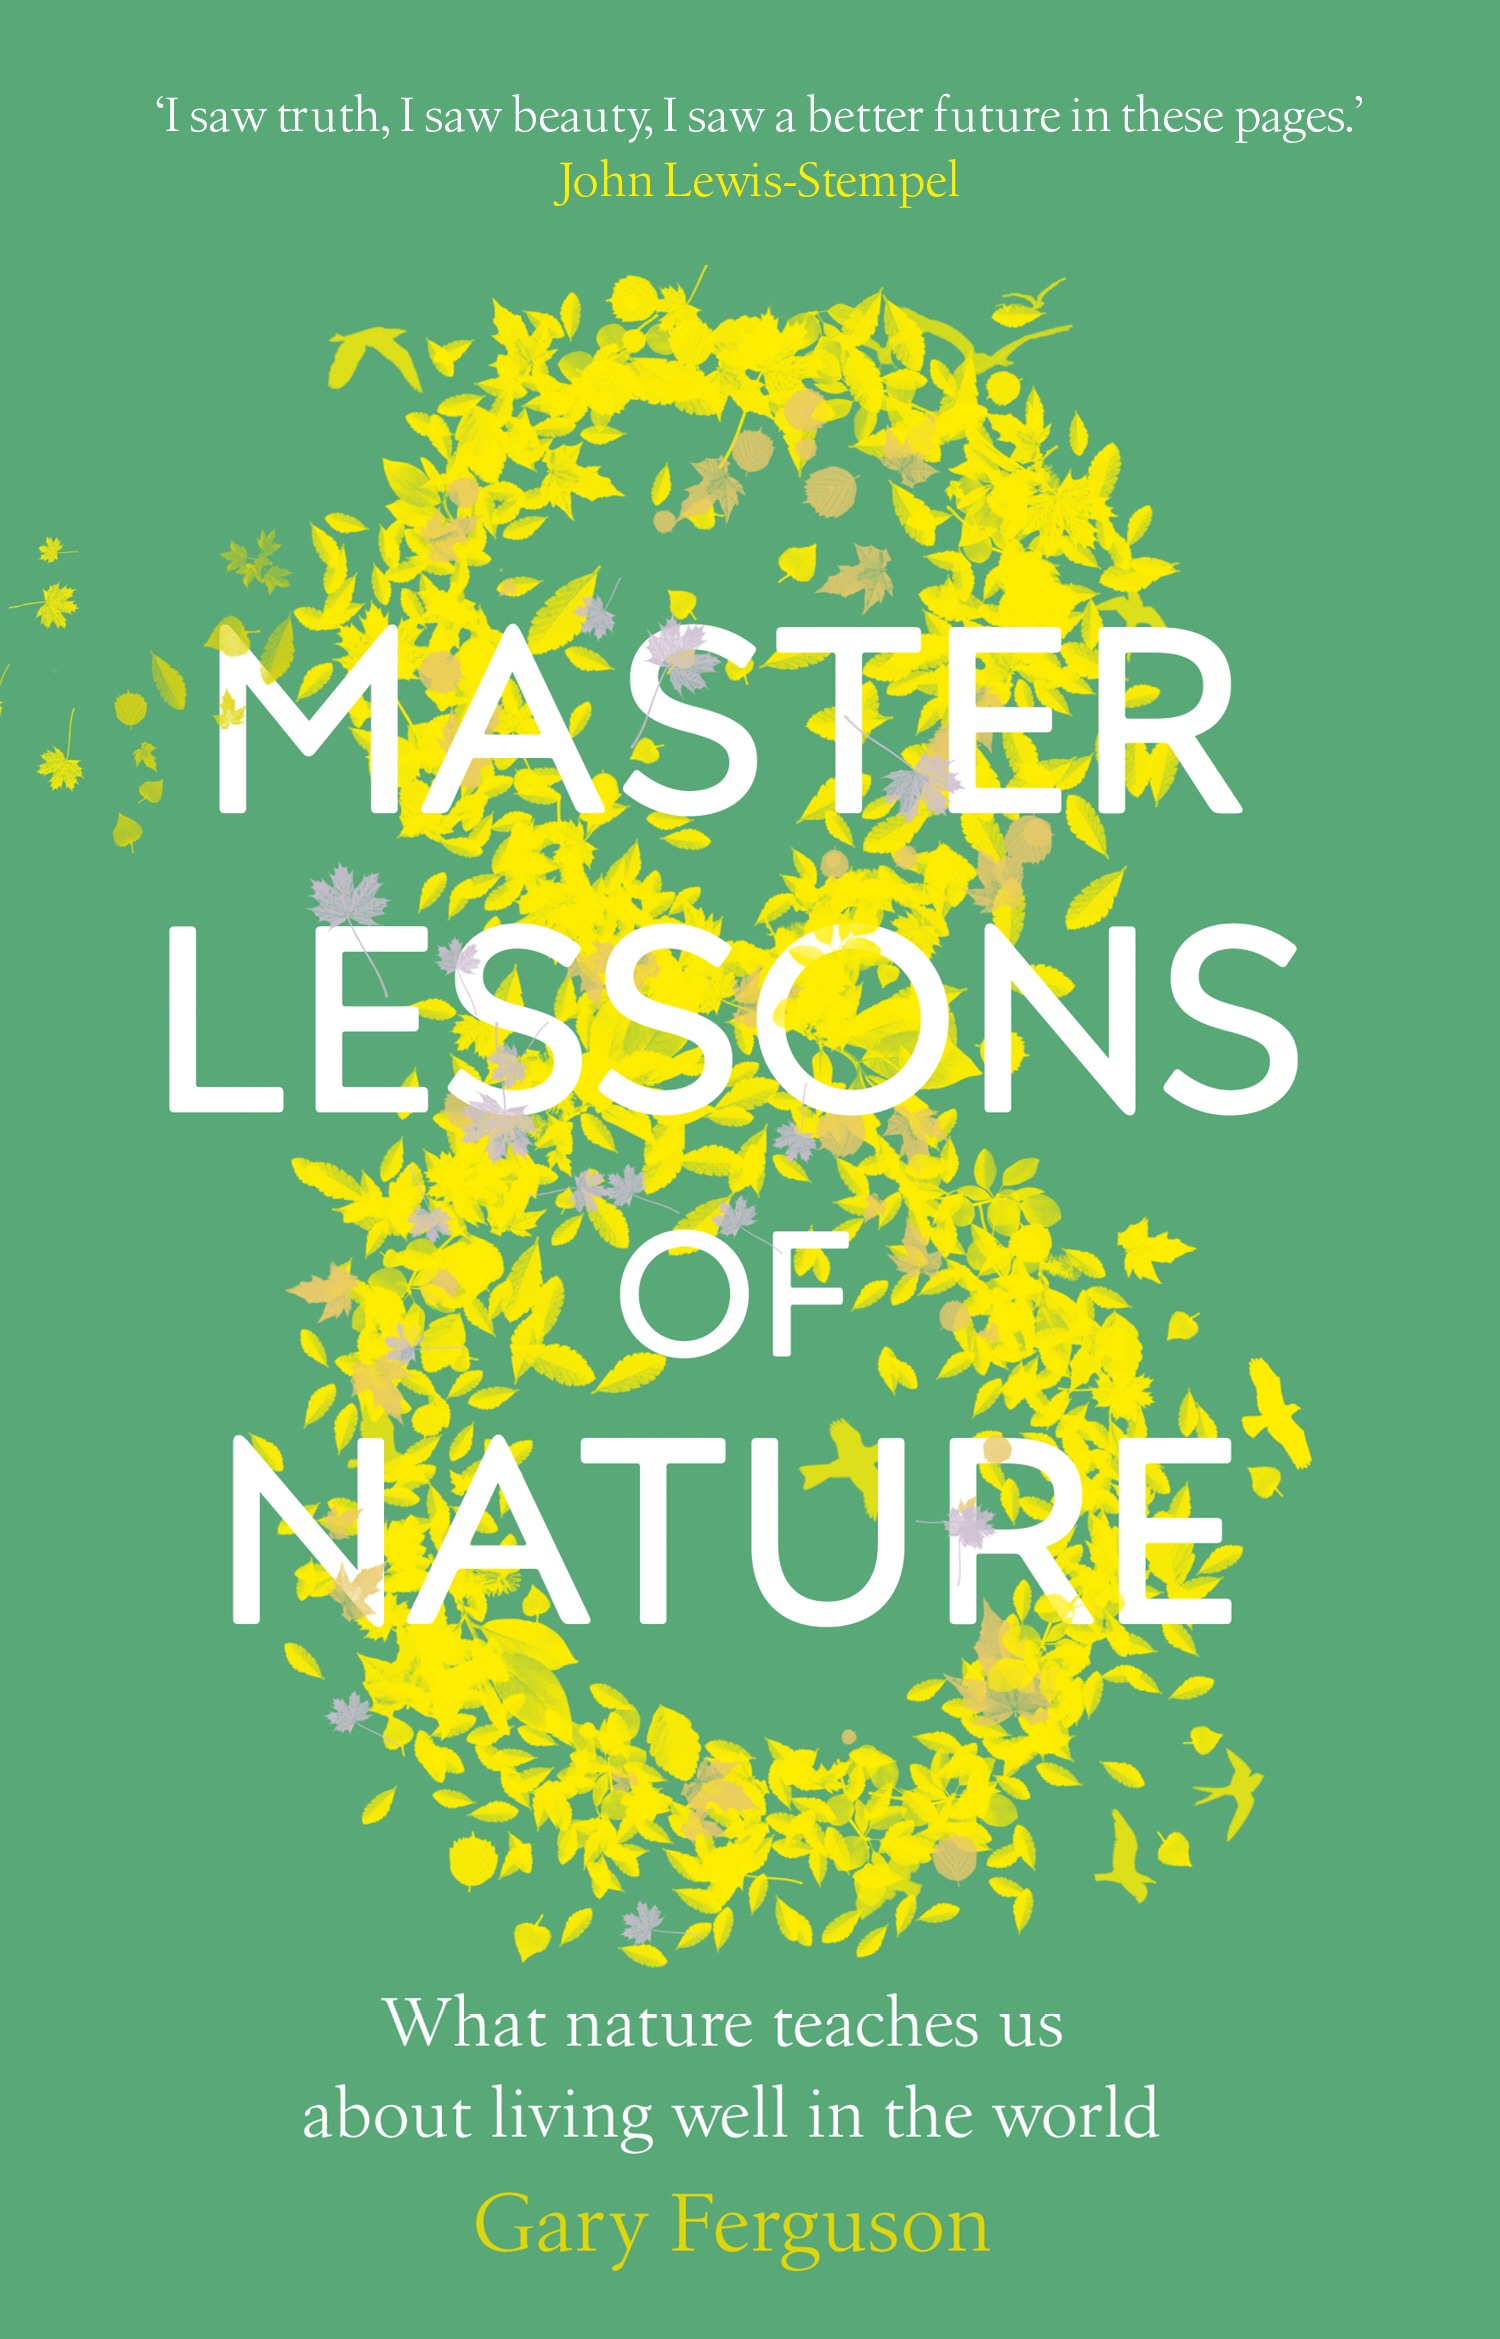 Book “Eight Master Lessons of Nature” by Gary Ferguson — January 1, 2098